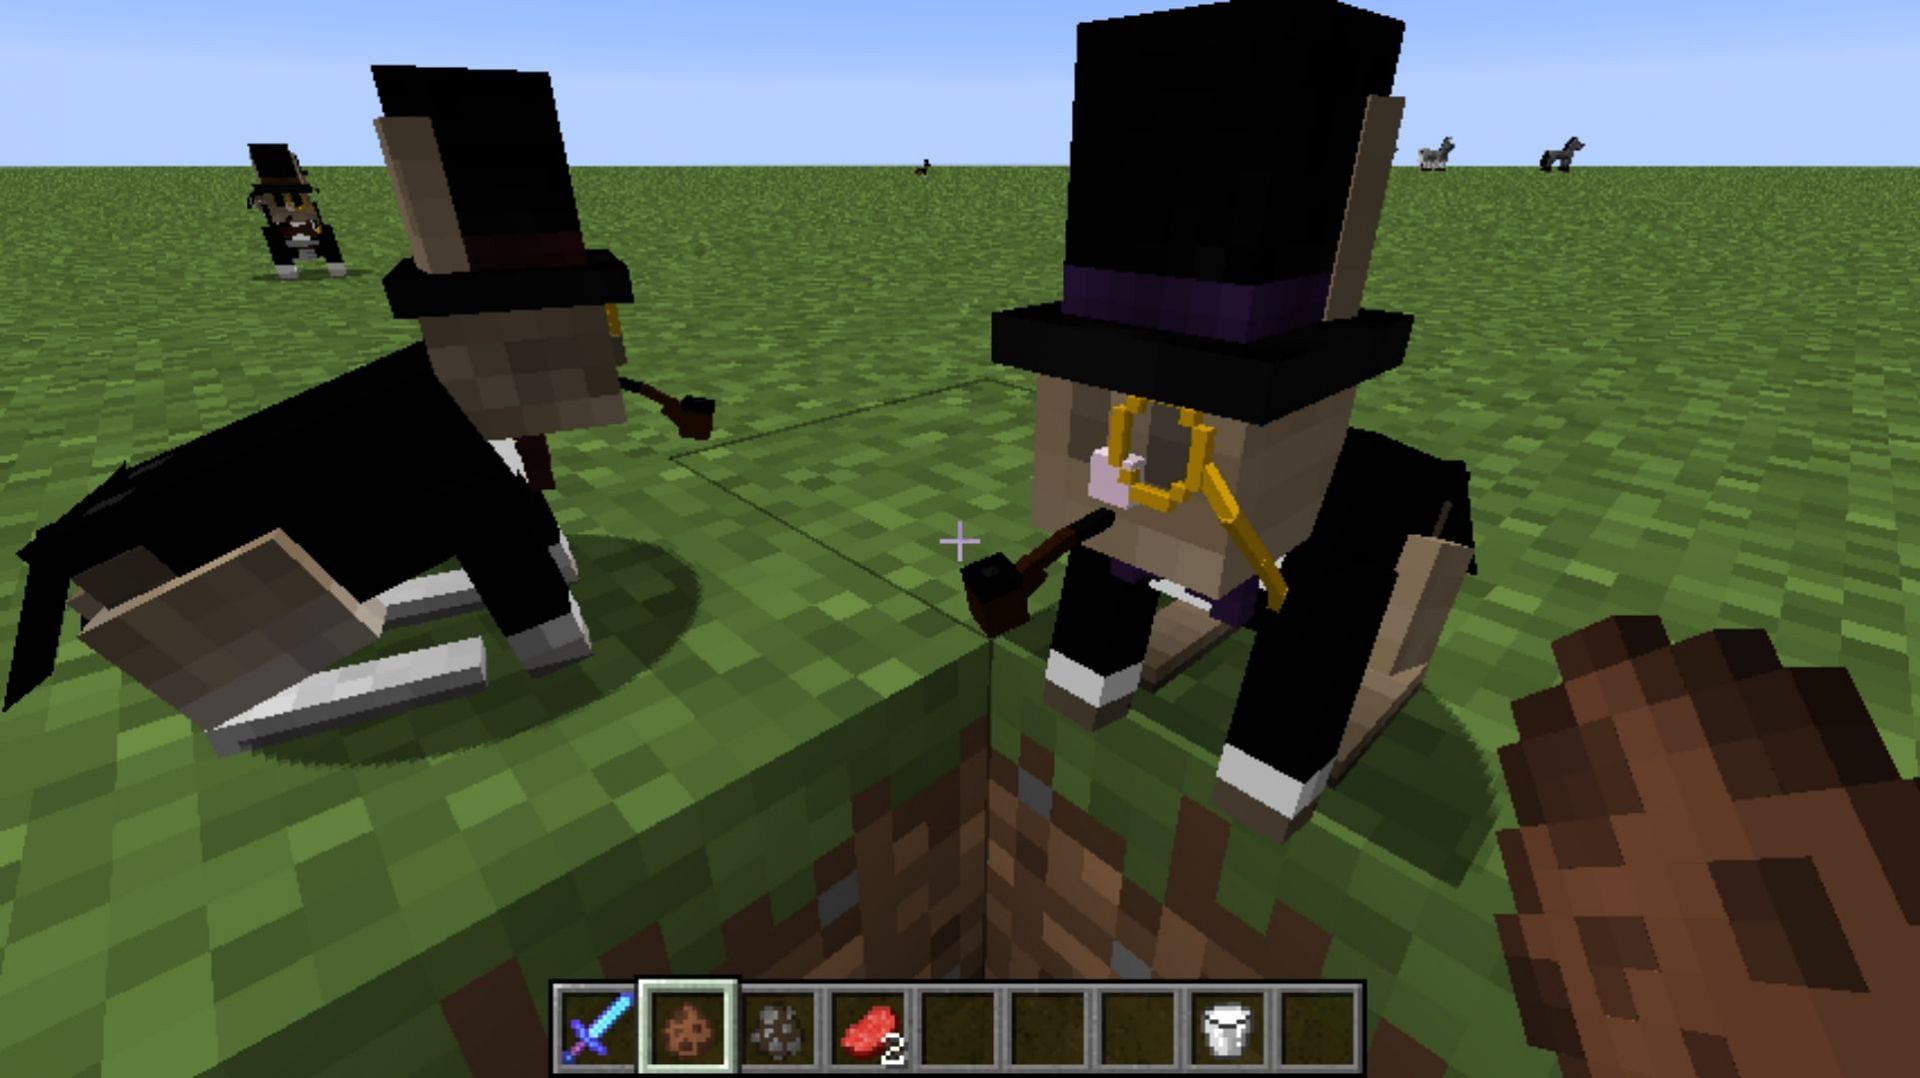 This mod adds new textures to bunnies in Minecraft (Image via CurseForge)